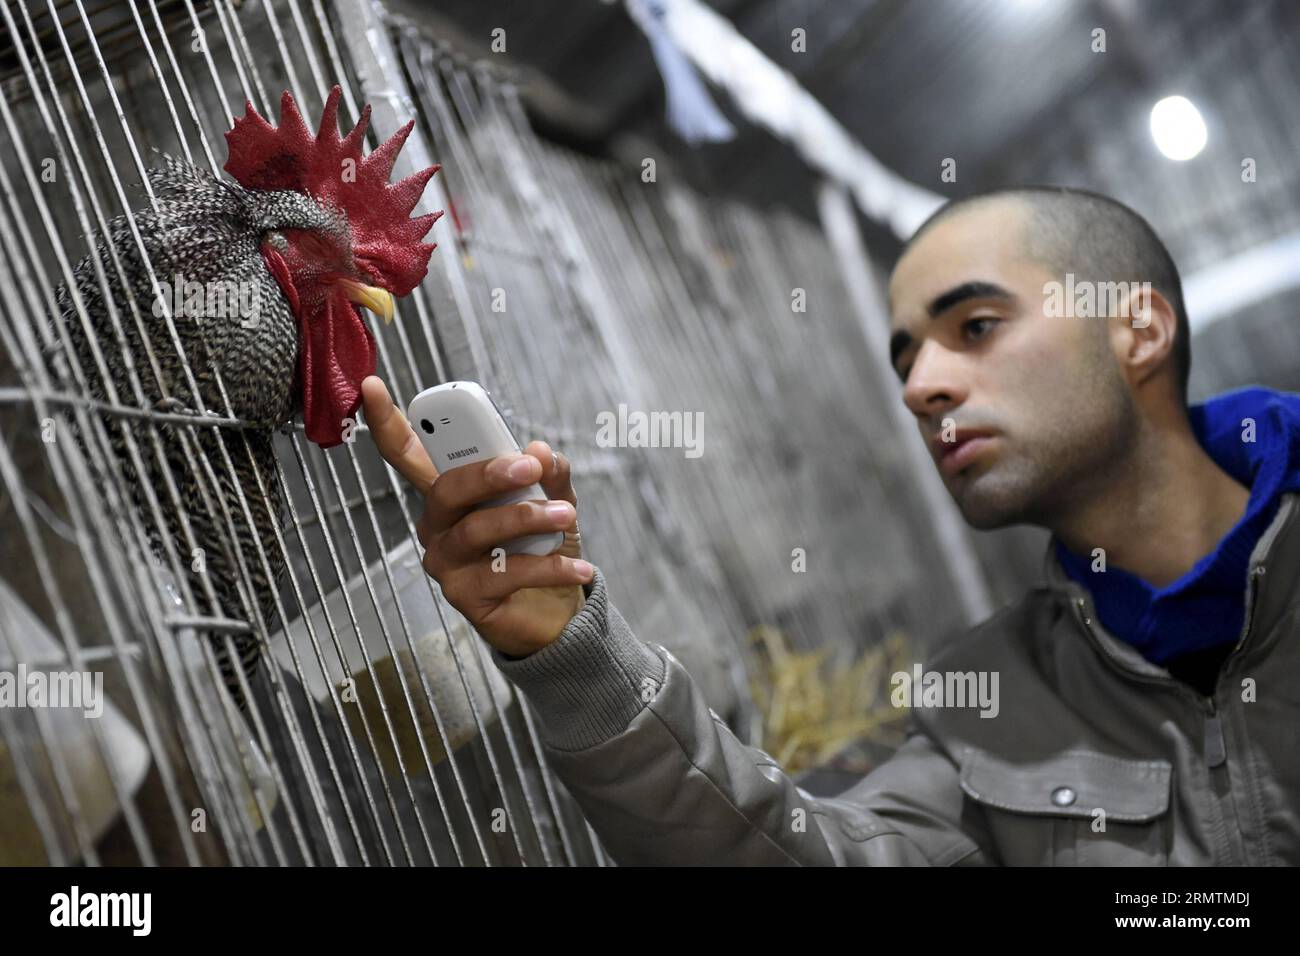 (140910) -- MONTEVIDEO, Sept. 10, 2014 -- A man touches a rooster during the 109th International Exhibition of Livestock and International Agro-Industrial and Commercial Show in Montevideo, capital of Uruguay, on Sept. 10, 2014. The exhibition is held for more than a century and now presents over 2,500 animals this year, according to local press. Nicolas Celaya) URUGUAY-MONTEVIDEO-EXHIBITION e NICOLASxCELAYA PUBLICATIONxNOTxINxCHN   Montevideo Sept 10 2014 a Man touches a Rooster during The 109th International Exhibition of Livestock and International Agro Industrial and Commercial Show in Mon Stock Photo